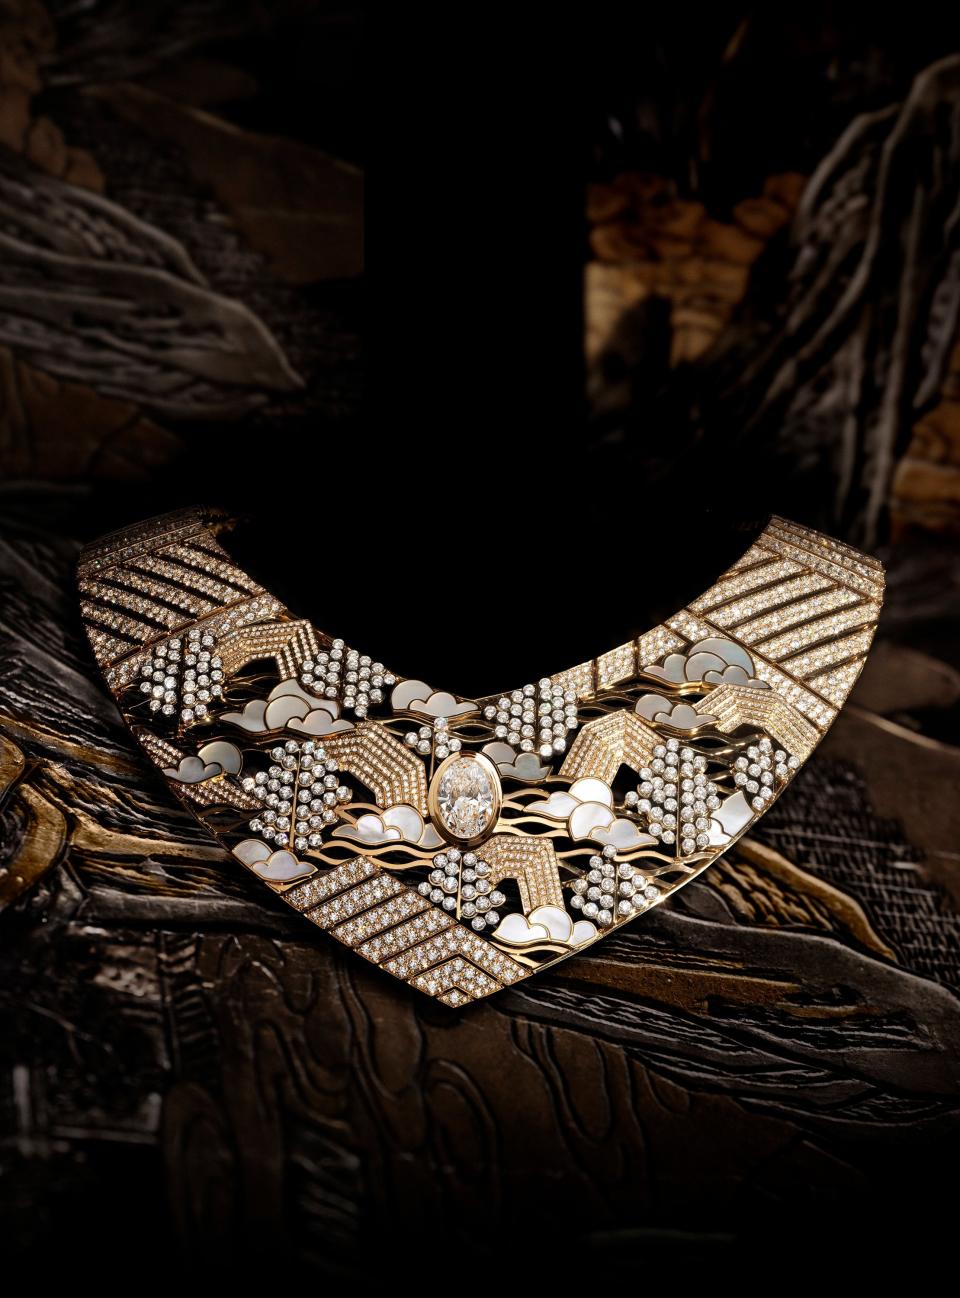 Chanel’s new high jewelry offering is inspired by Coco’s personal collection of Coromandel screens.